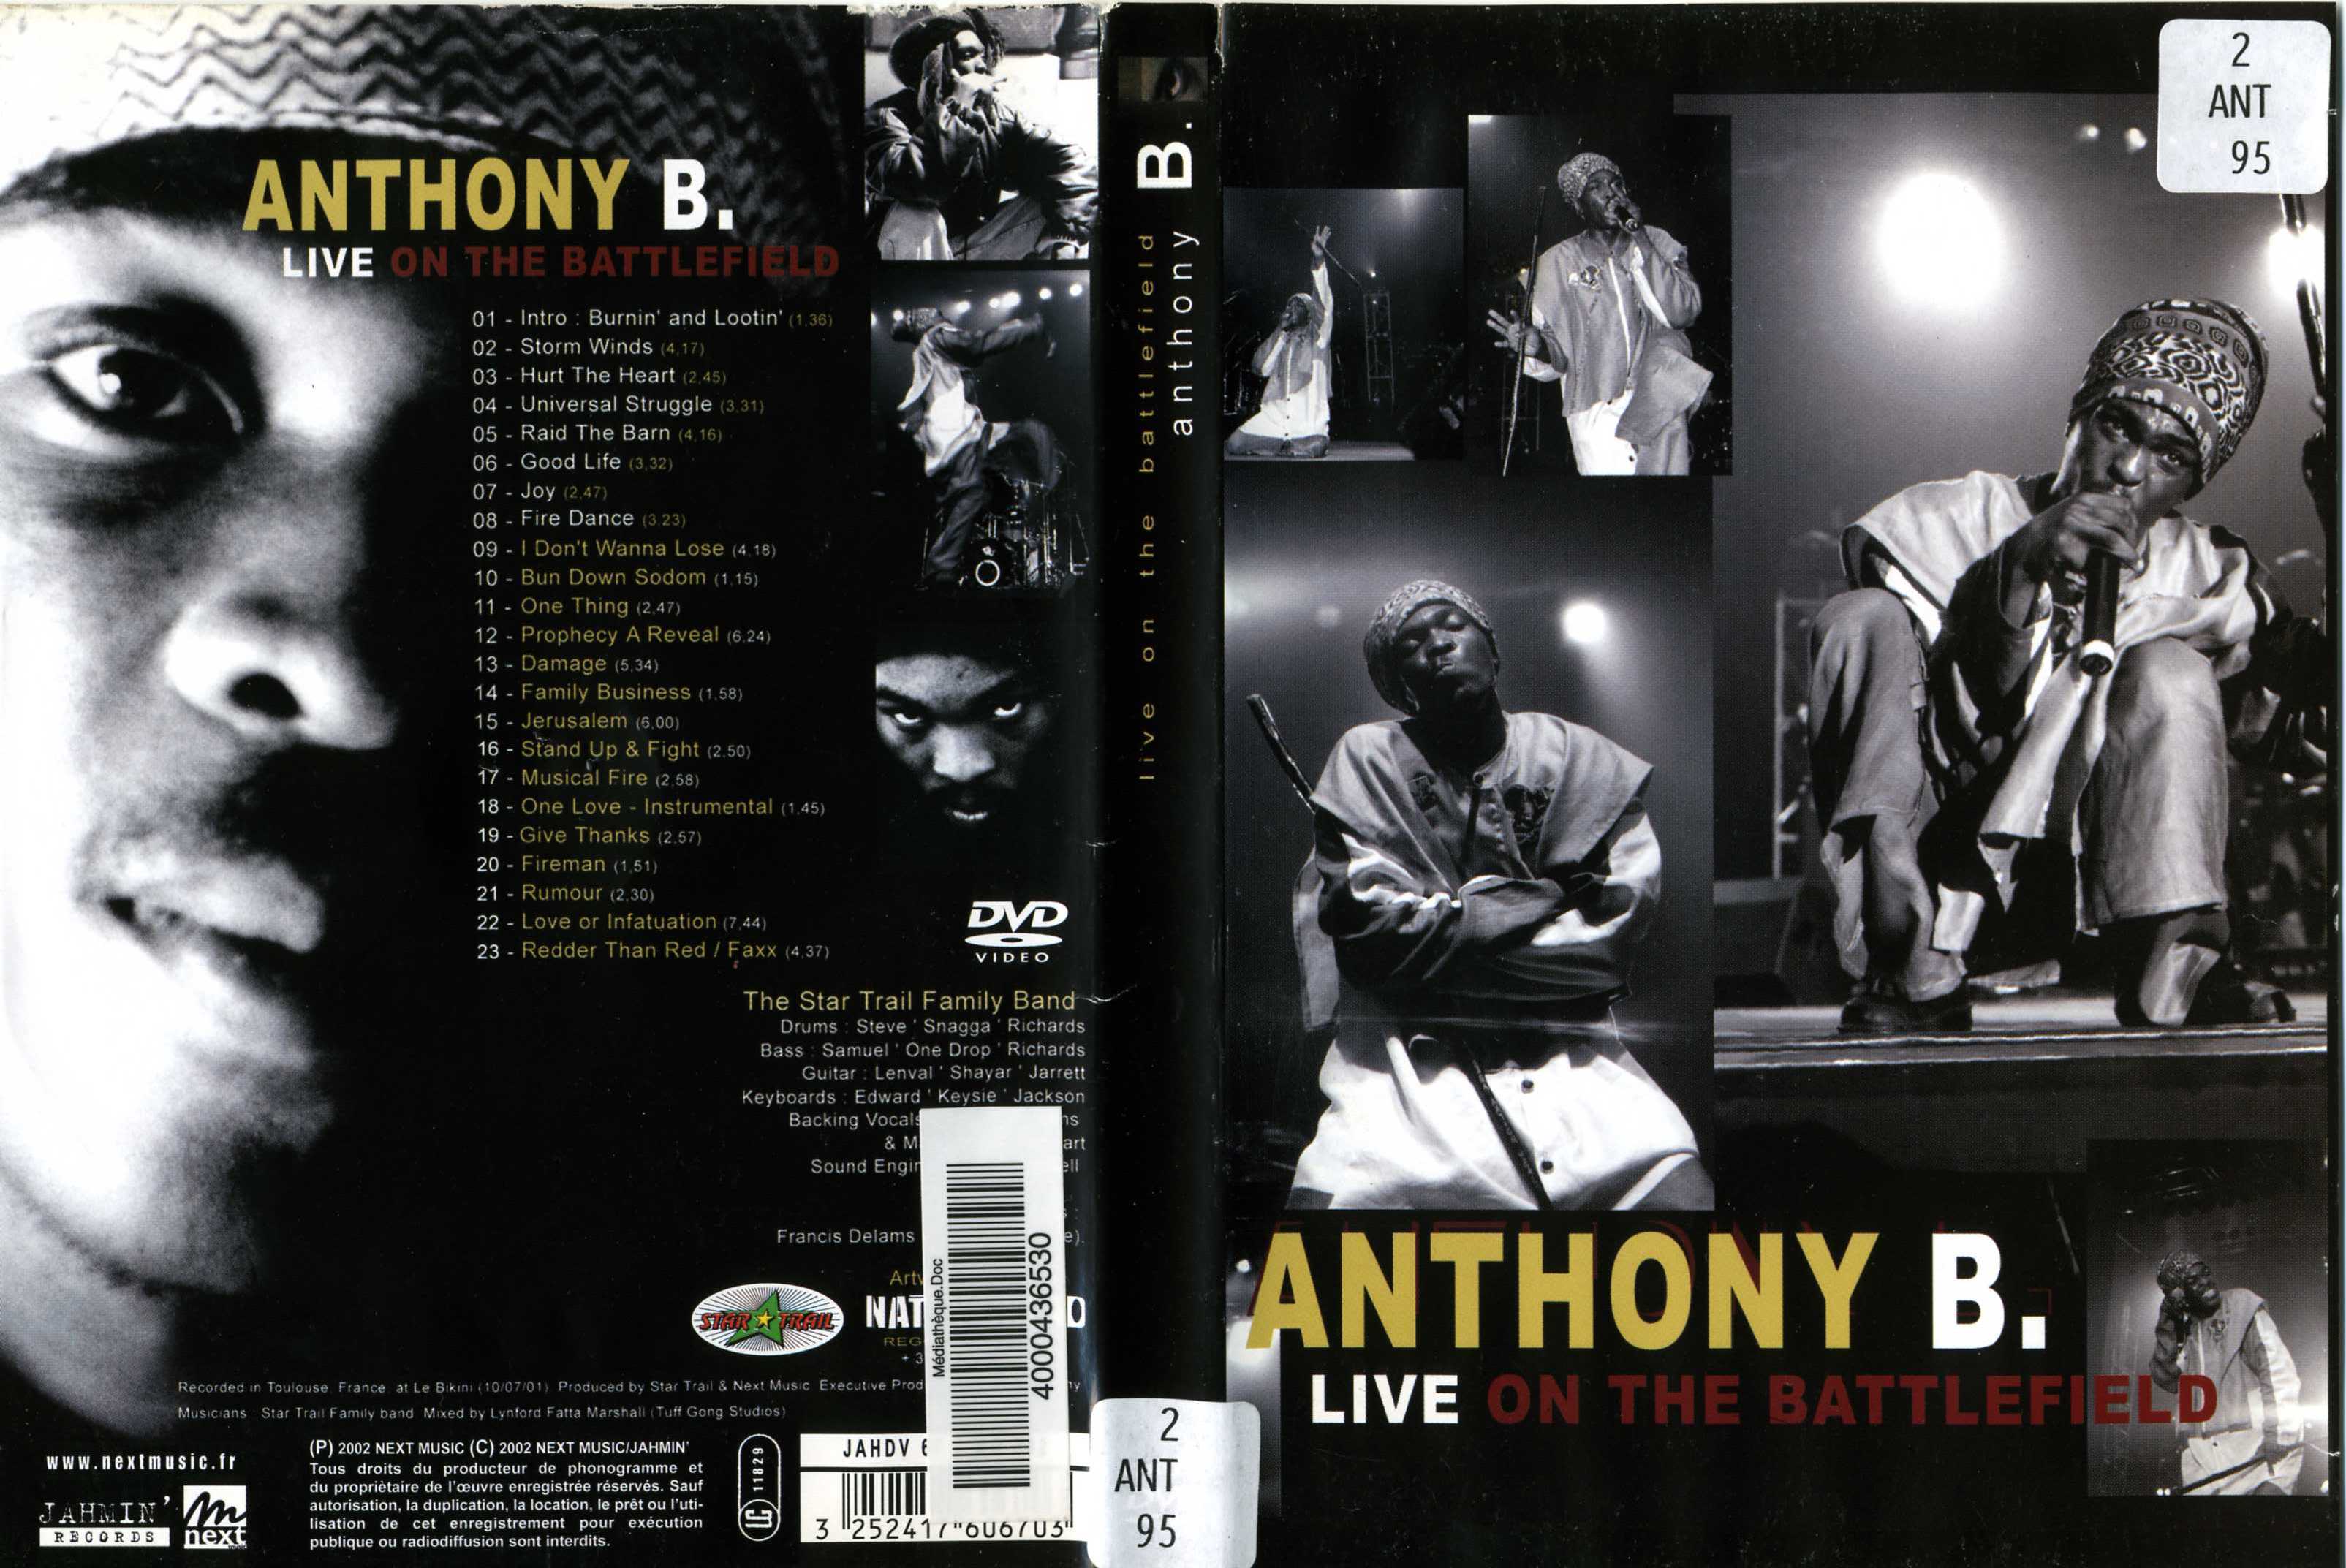 Jaquette DVD Anthony B Live on the Battlefield